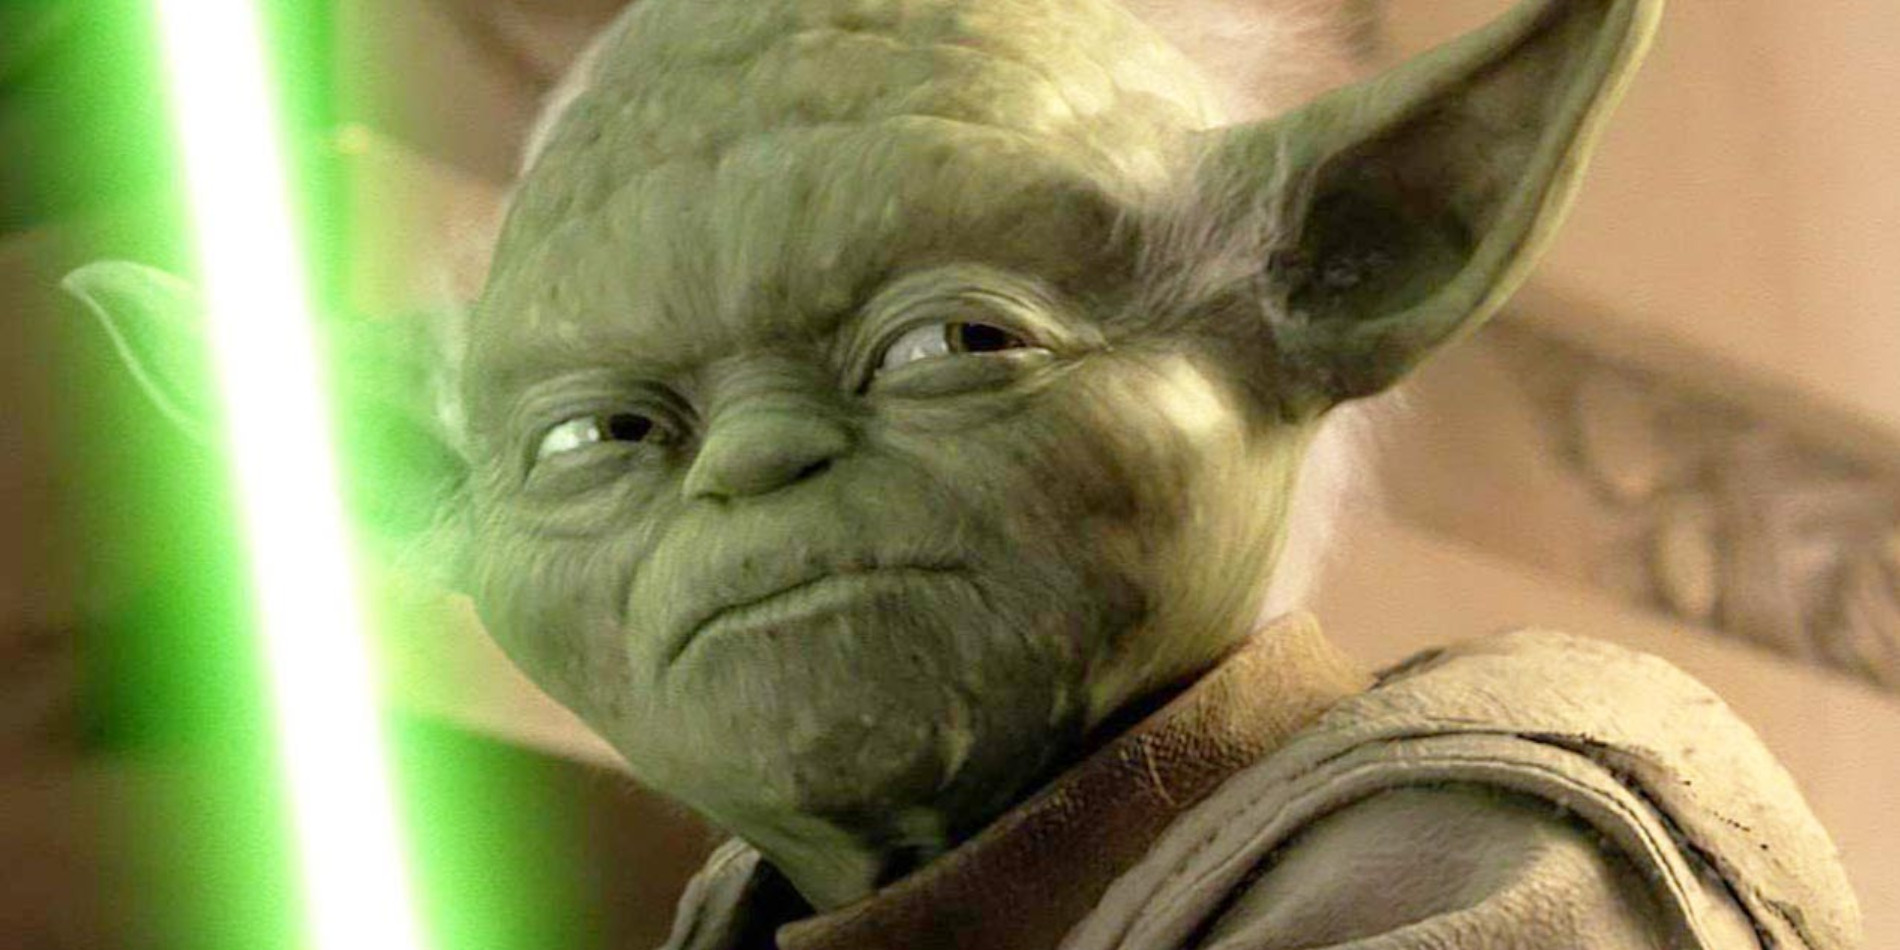 Latest Sci-Fi News: ‘Doctor Who’ legend vows he will never return as ‘Star Wars’ mind-blowing Yoda secret, revealed is